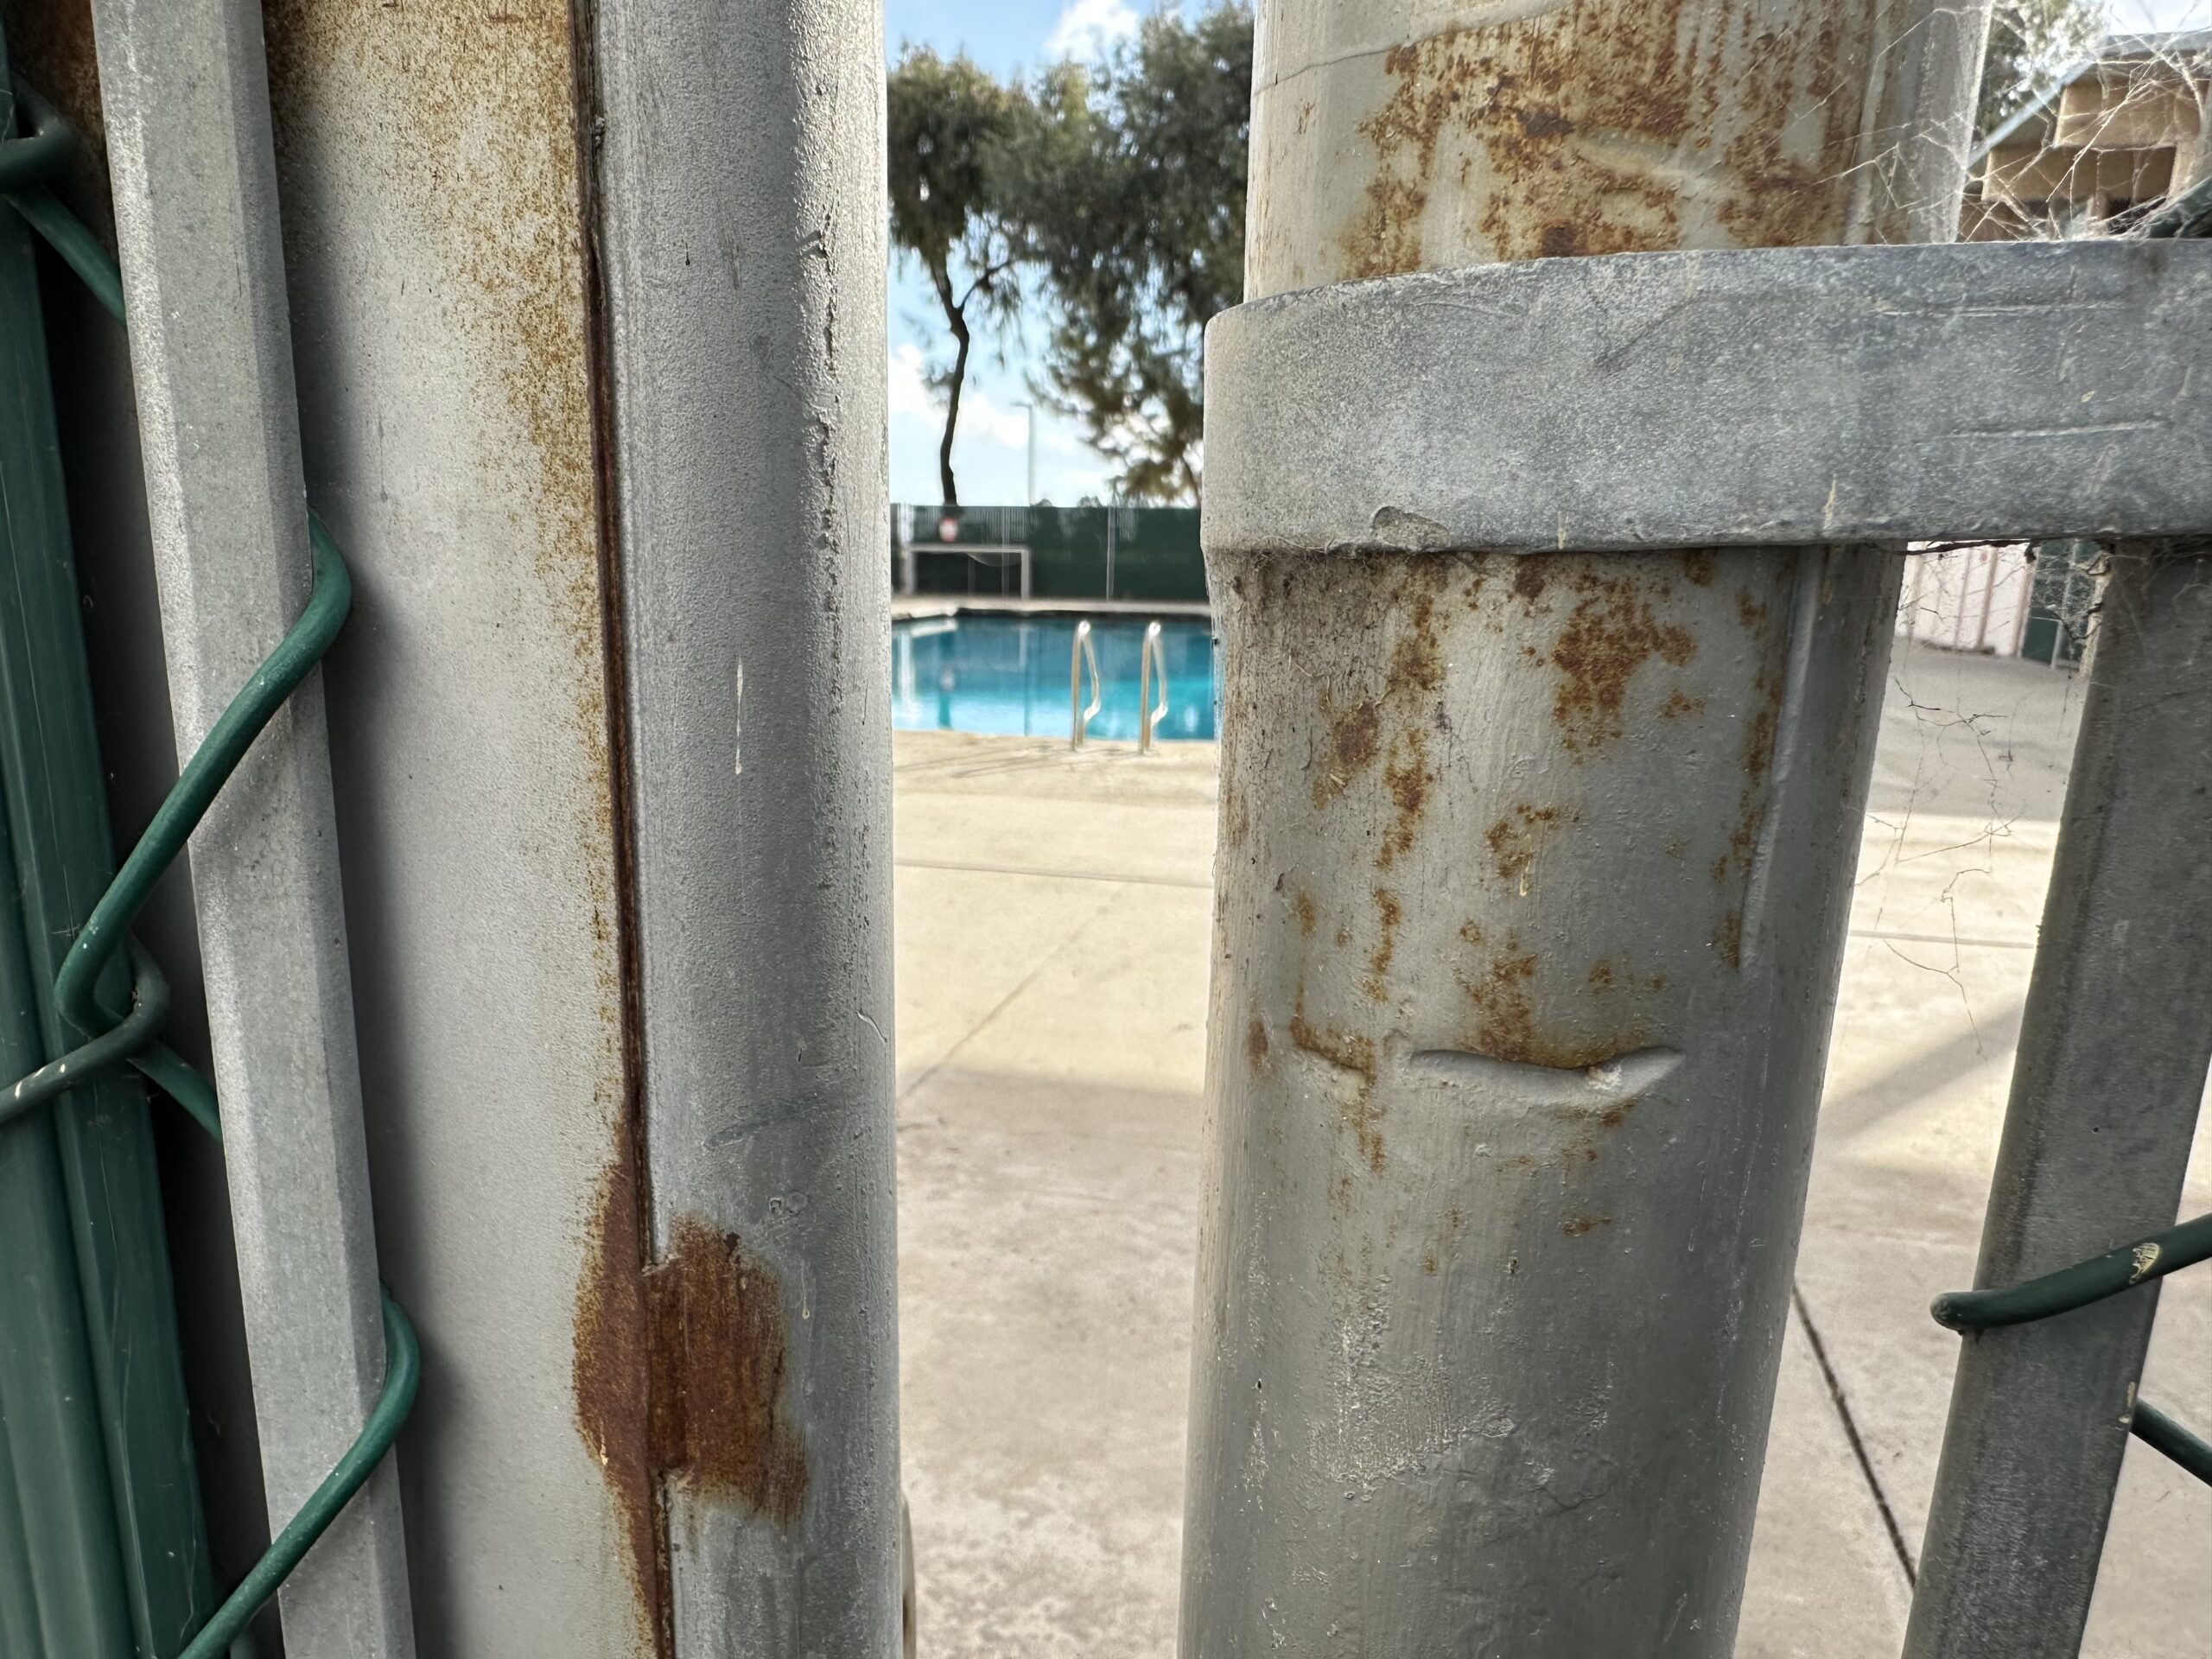 Photo of fence in front of swimming pool.